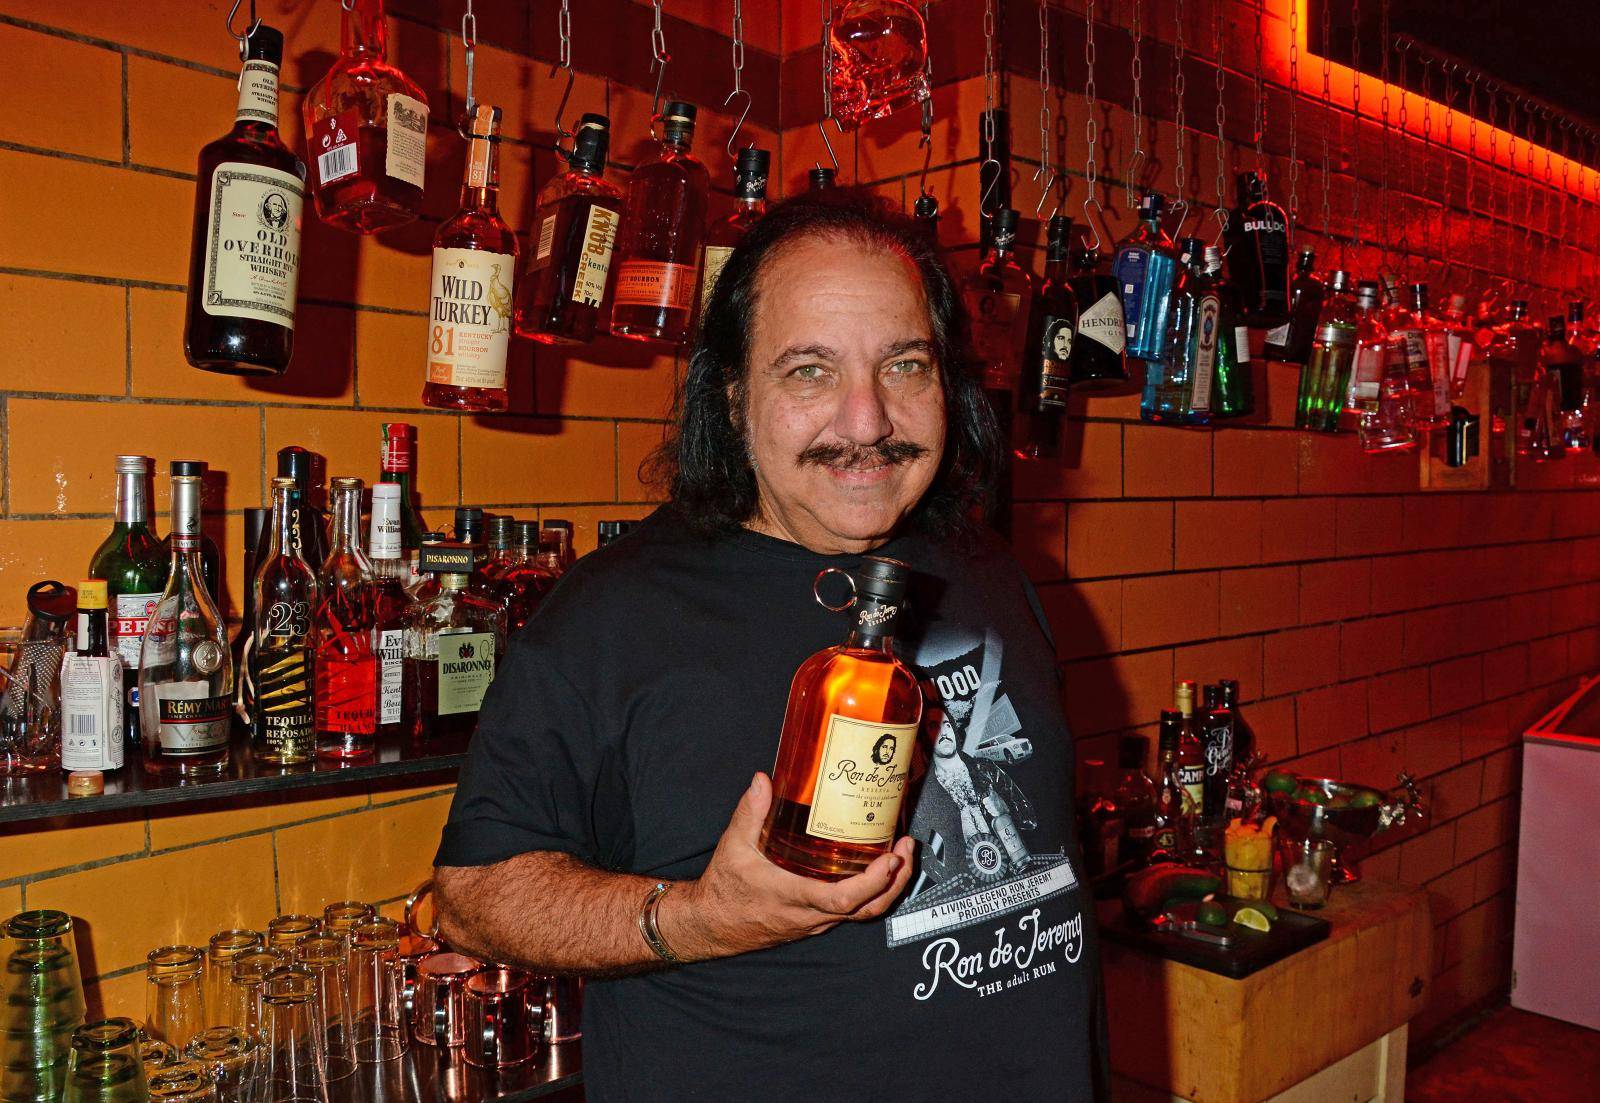 Celebrities at Ron de Jeremy (the Adult Rum) cocktail party at Butcher's bar.